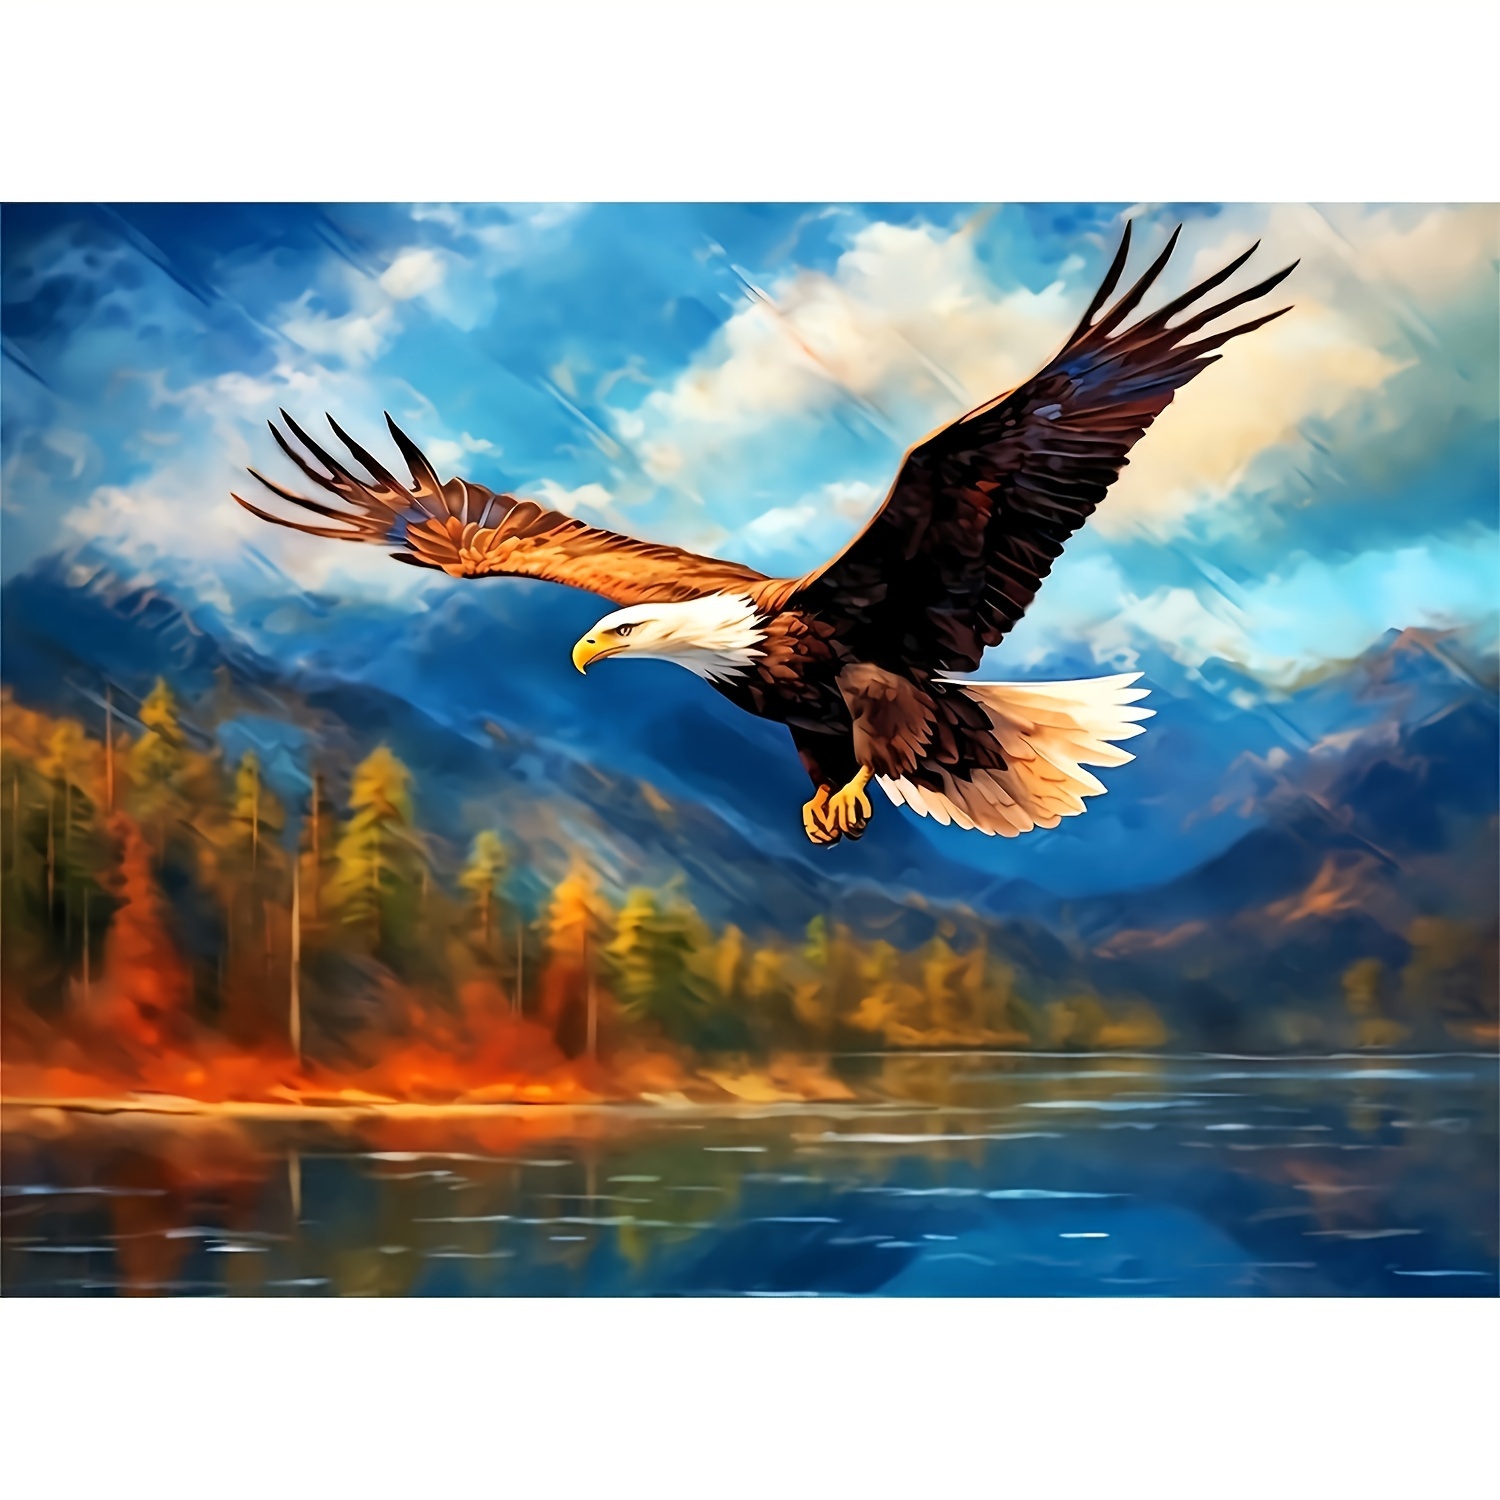 

1000 Piece Puzzle For Adults, Eagle Puzzles For Adults, Artistic Decorations